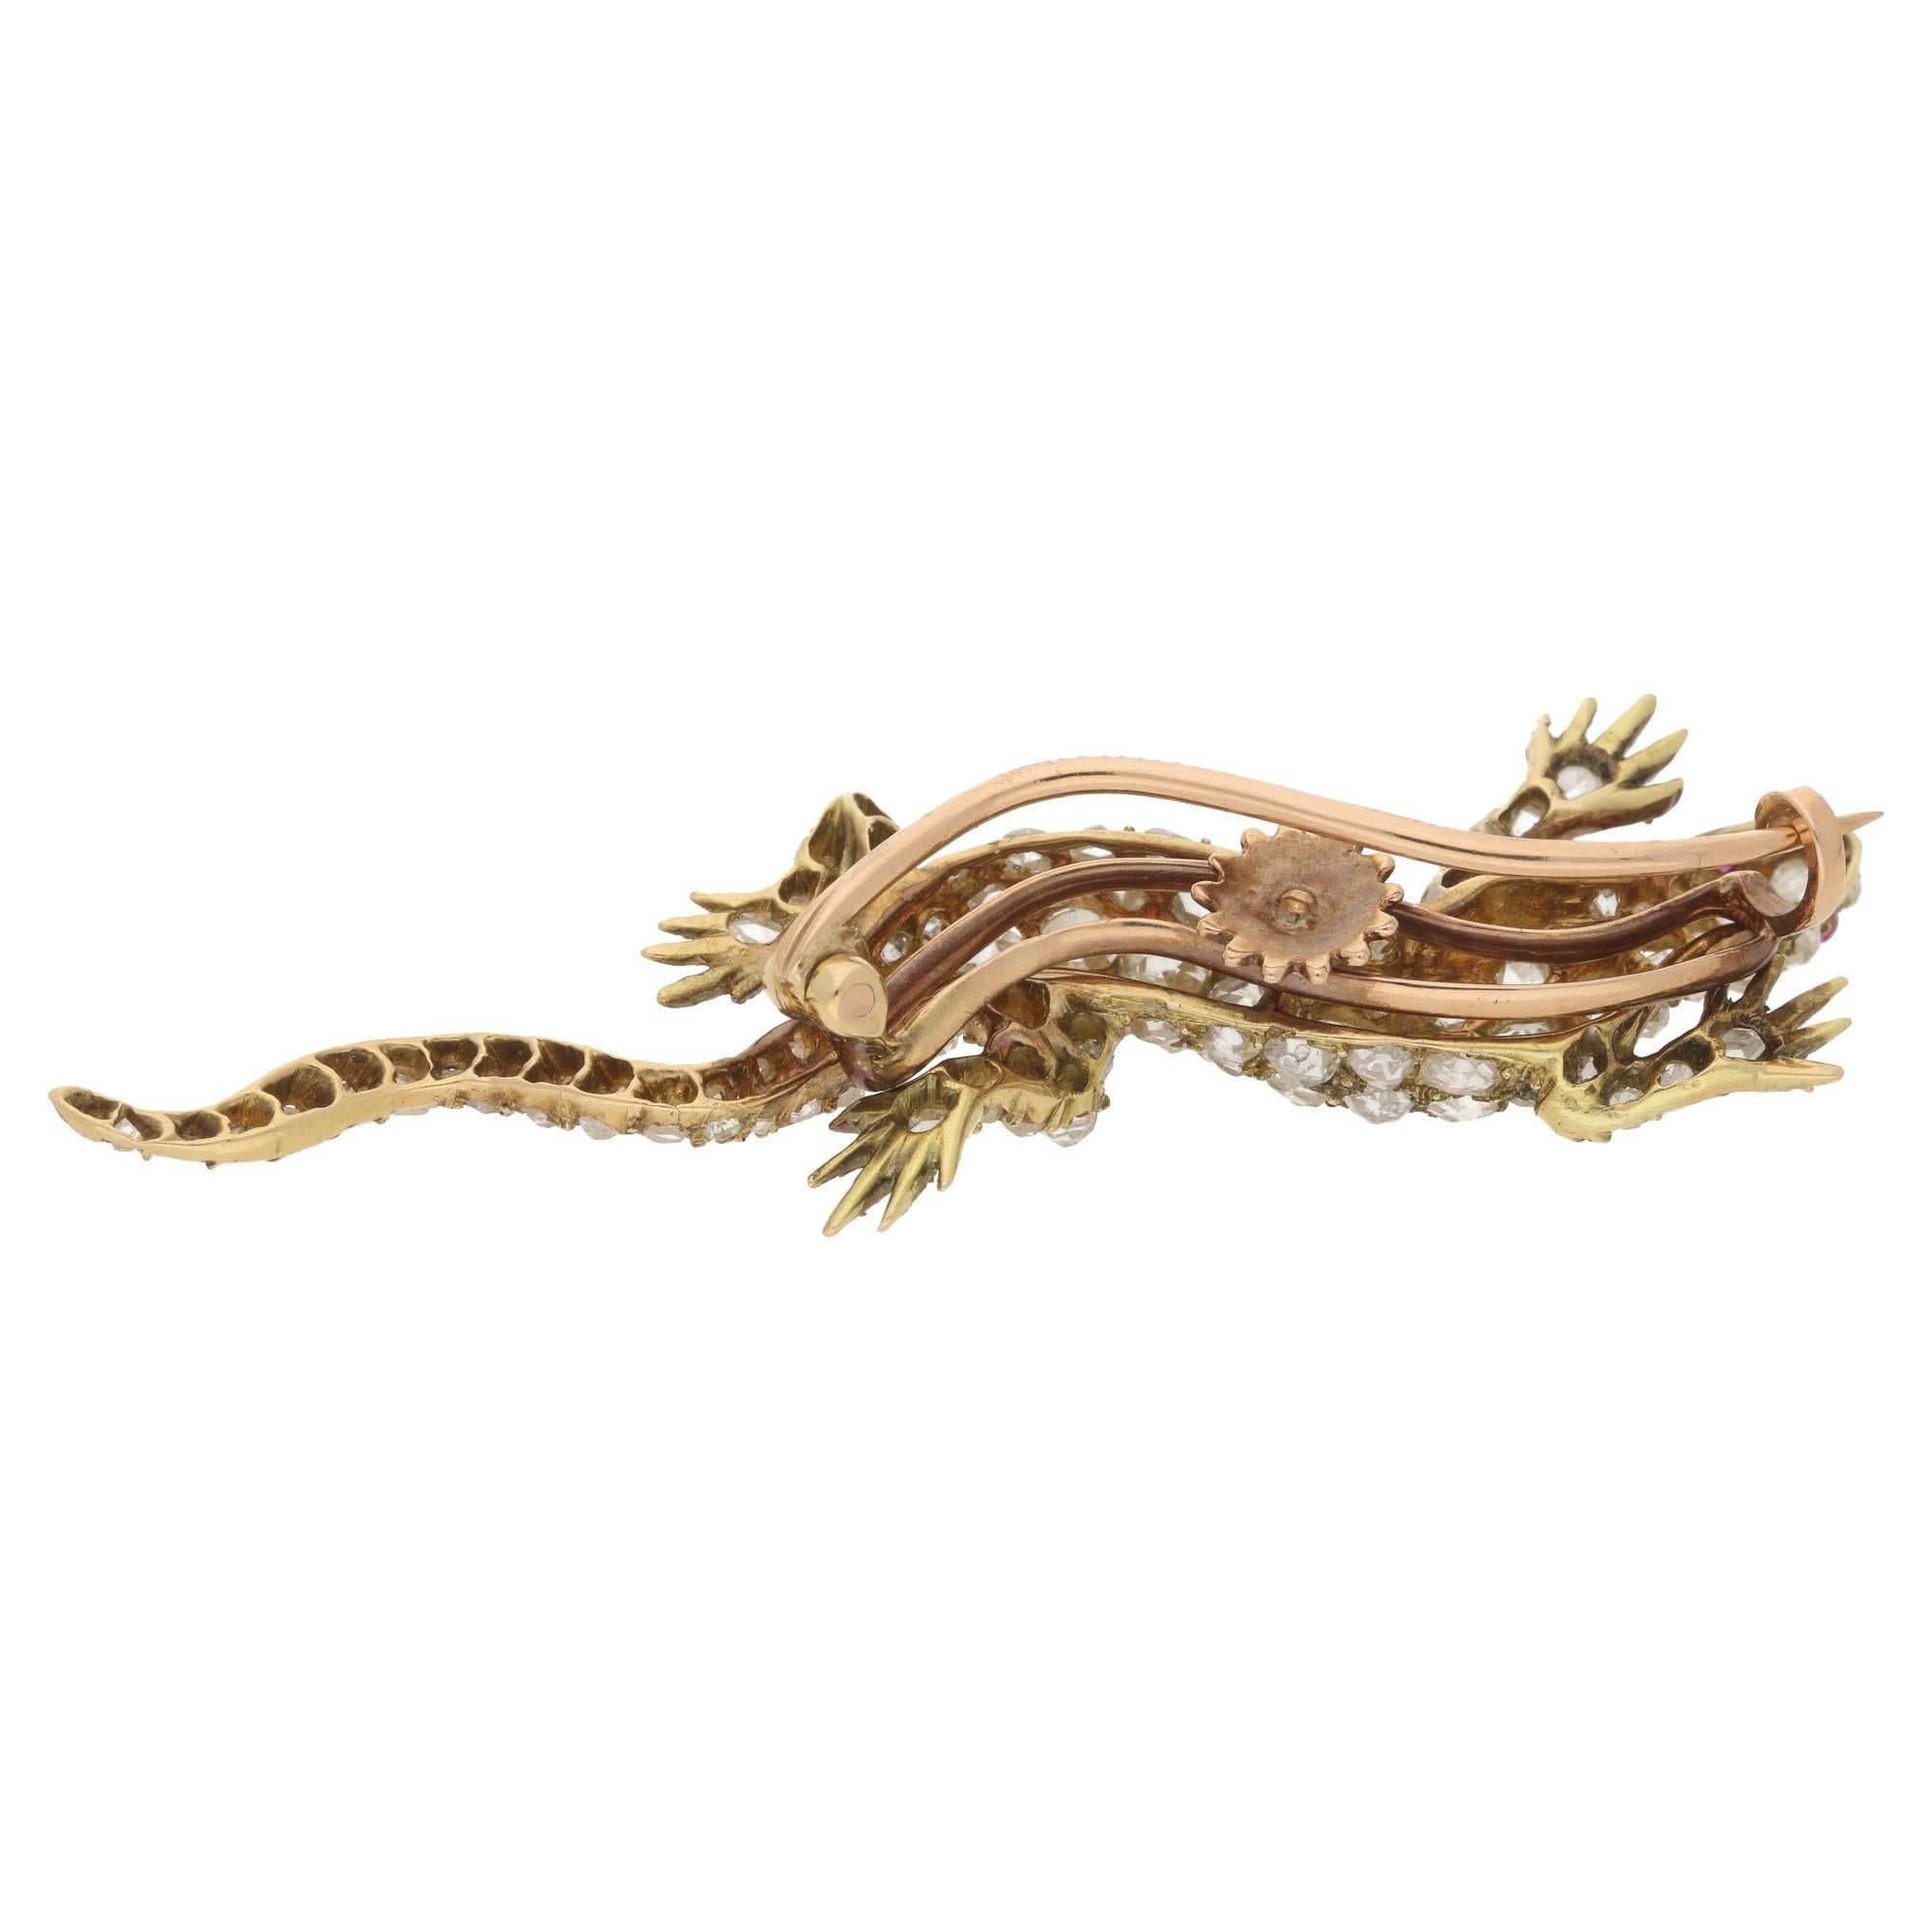 An exquisitely made 18ct gold antique diamond set lizard brooch, dating from 1880-1890. The body of the lizard is grain set with old mine and rose cut diamonds and its eyes are set with rubies. The brooch measures 6cm in length and 2cm in width.